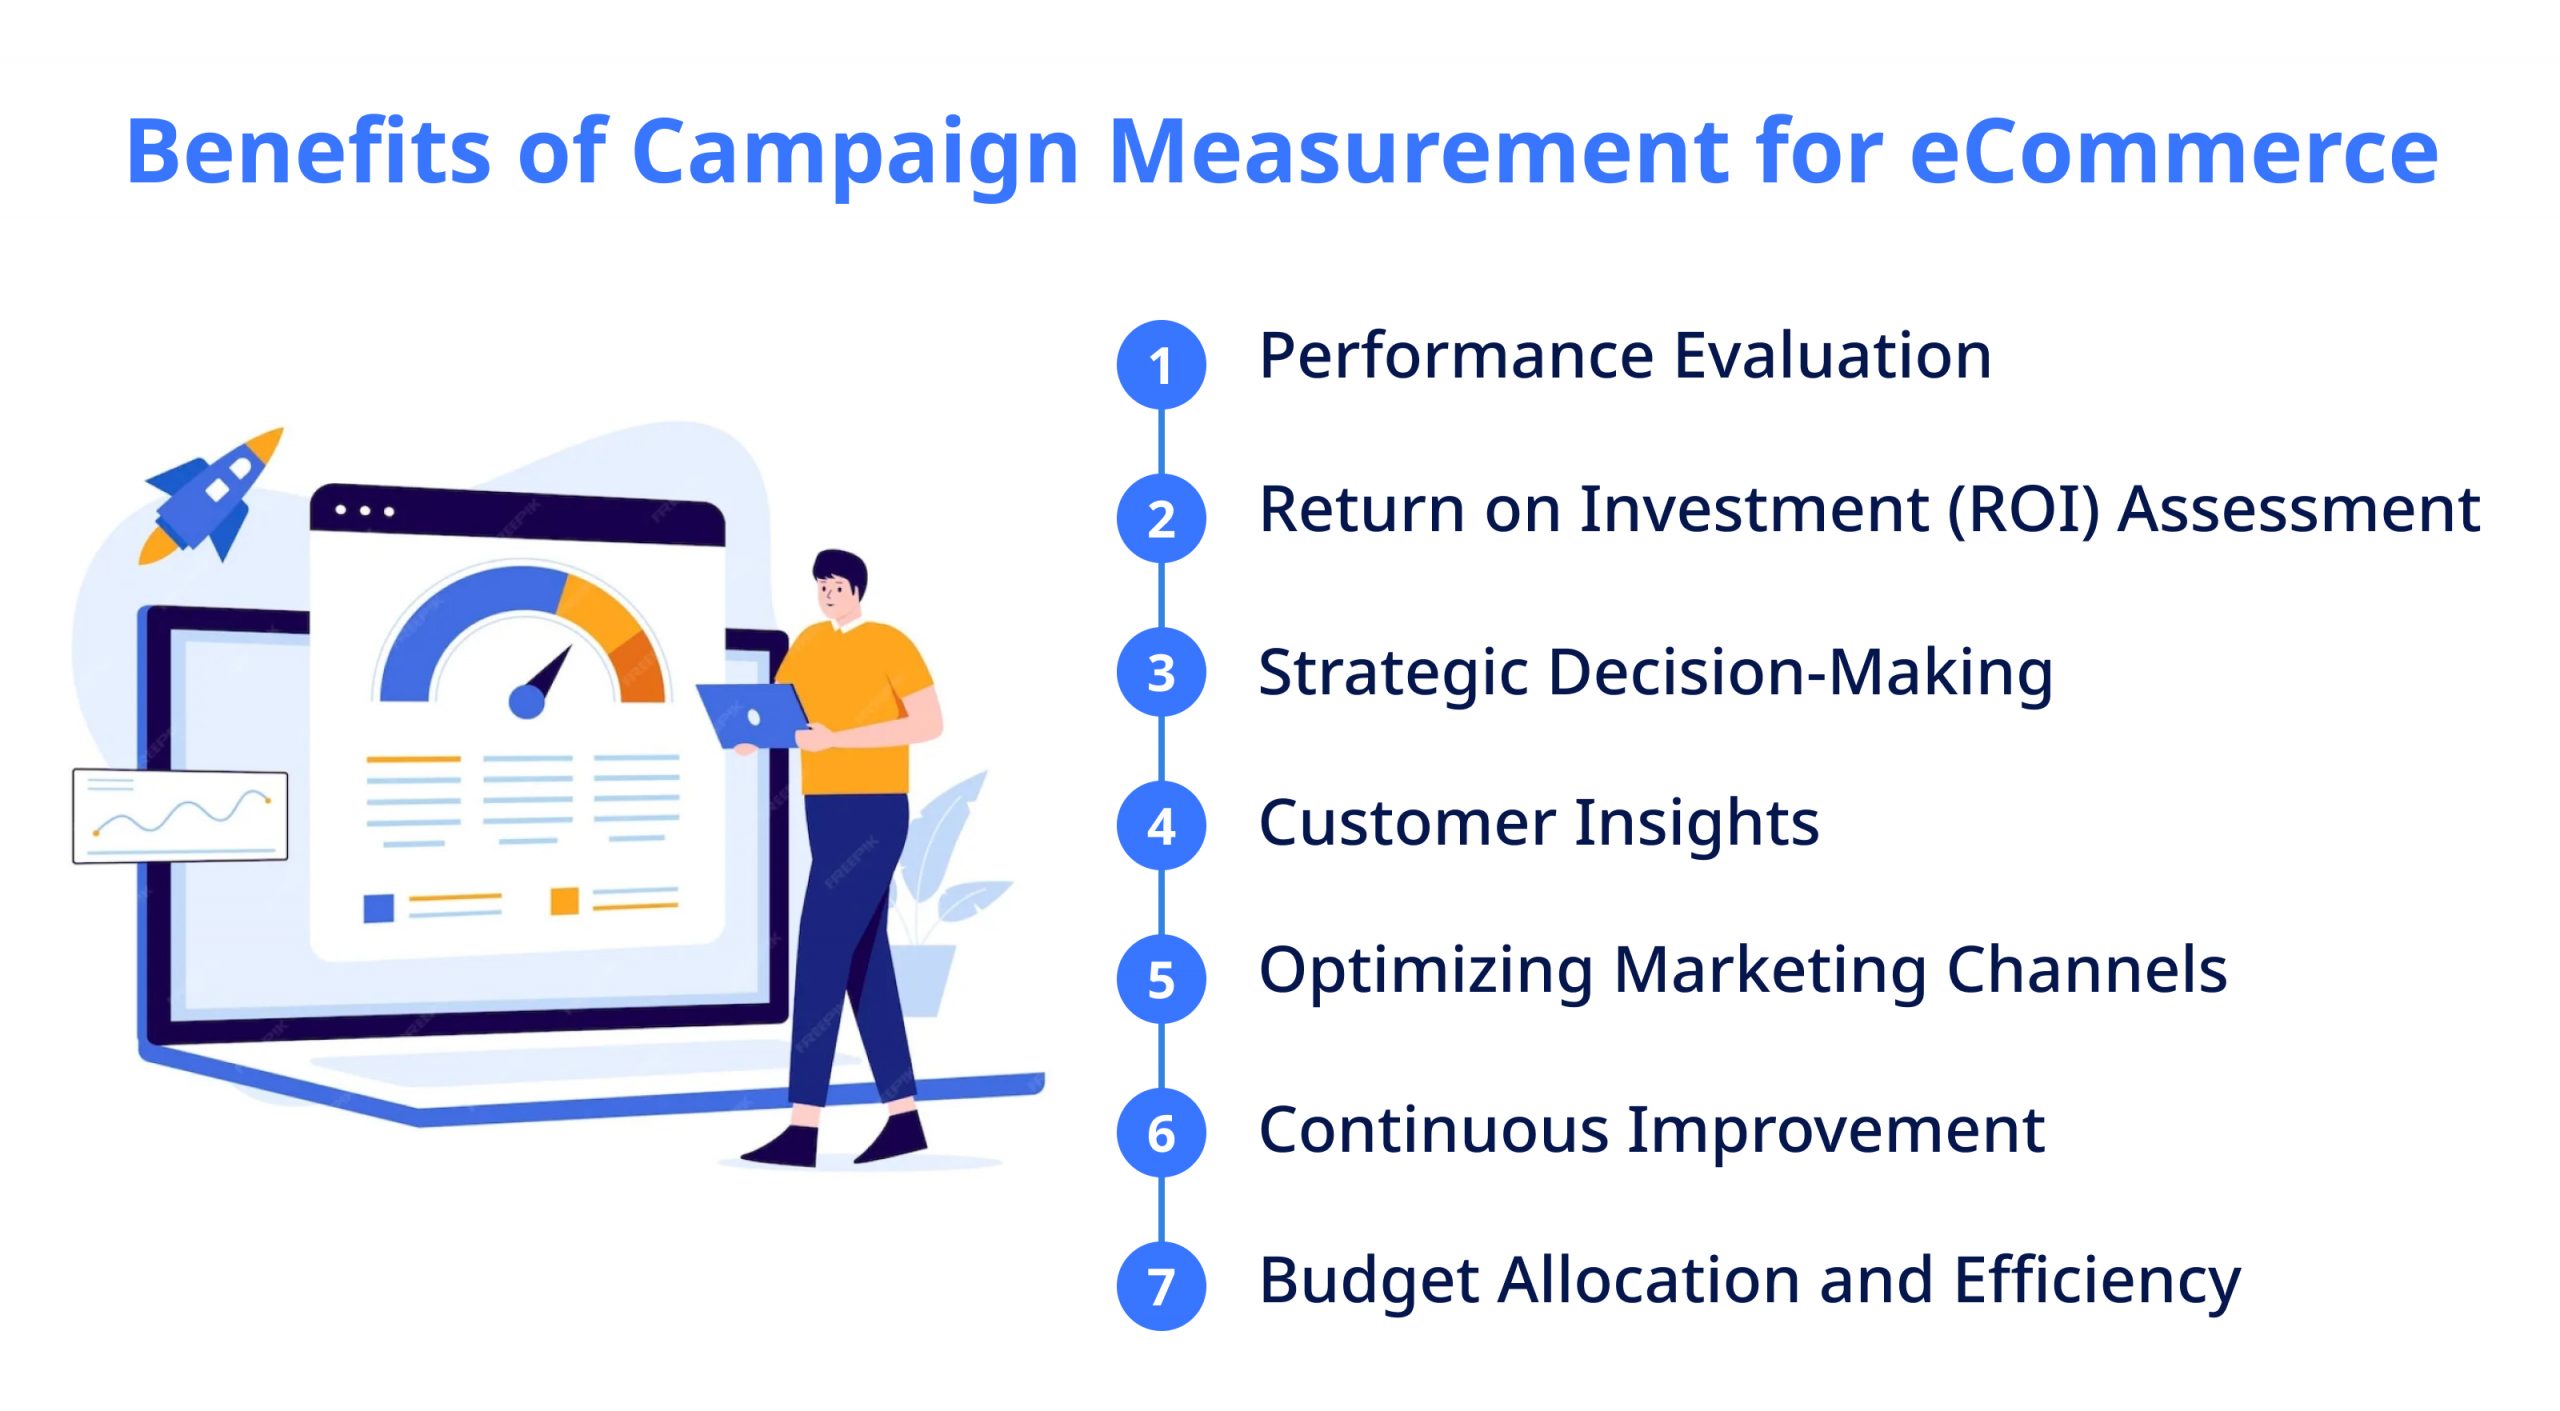 Benefits of Campaign Measurement for eCommerce